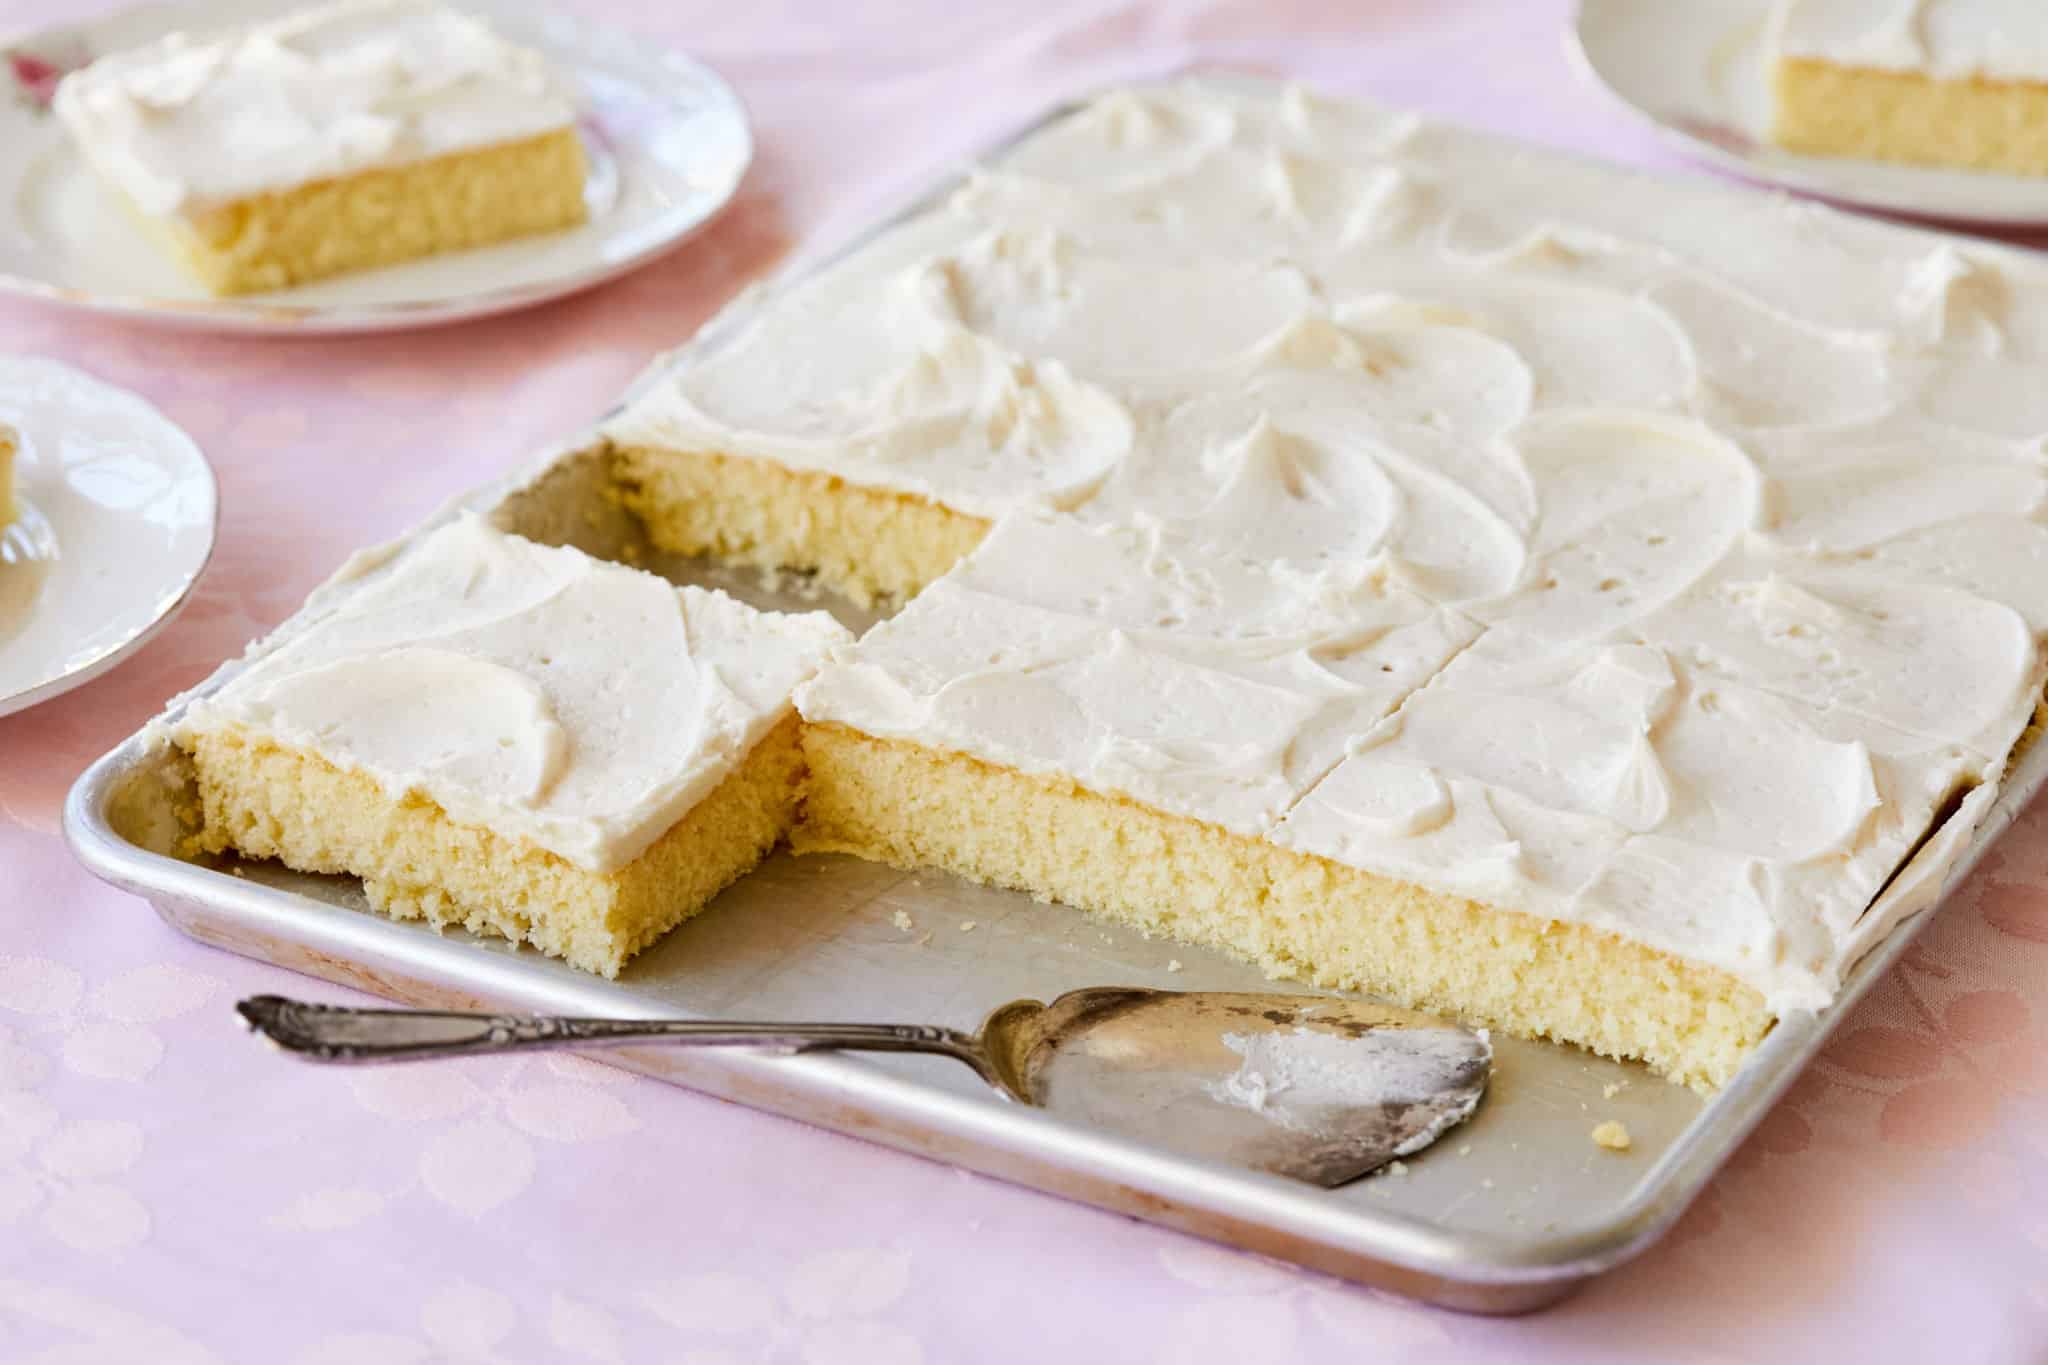 A vanilla sheet cake with slices served